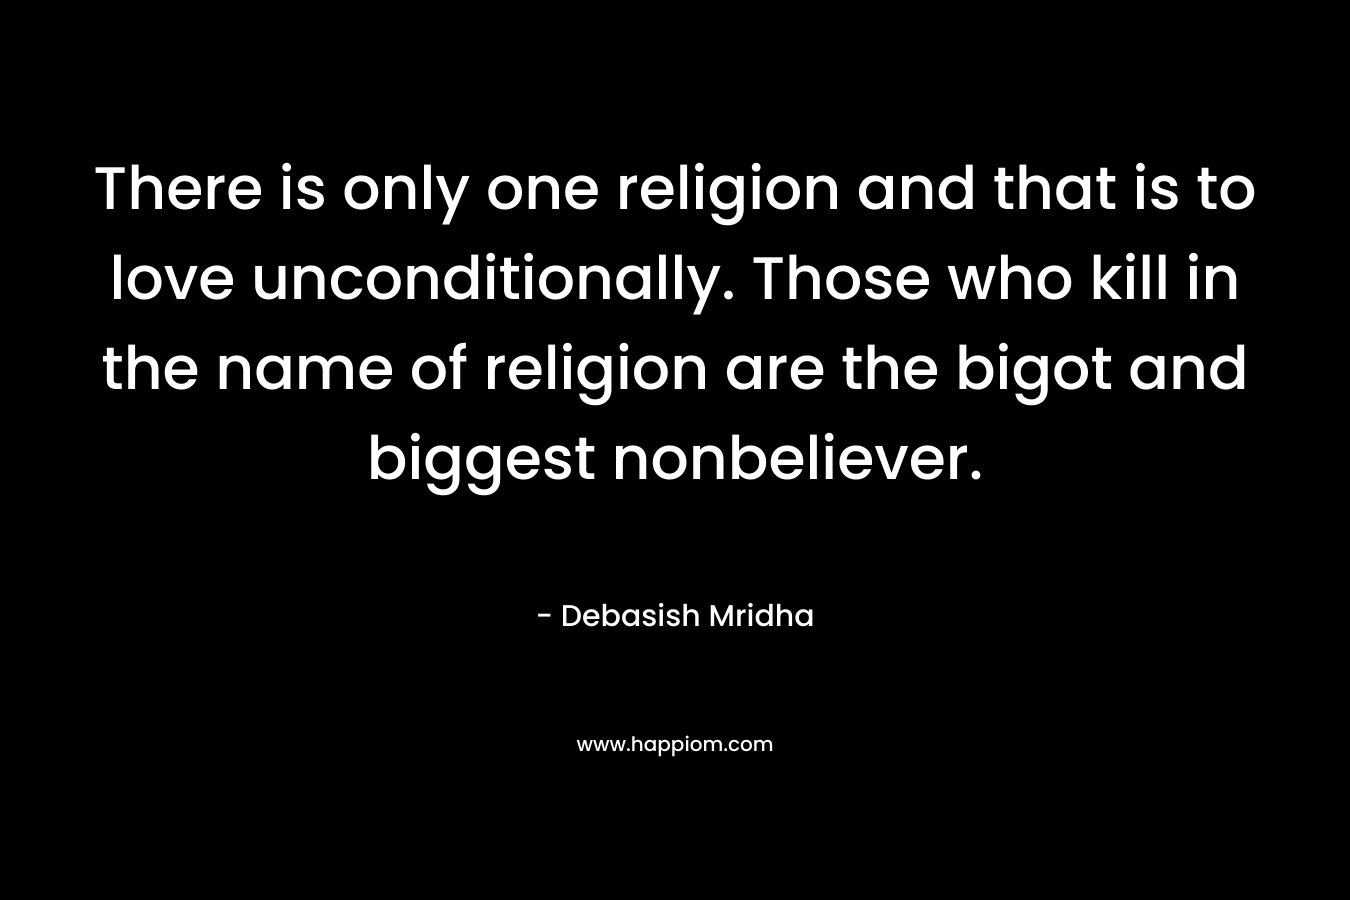 There is only one religion and that is to love unconditionally. Those who kill in the name of religion are the bigot and biggest nonbeliever.